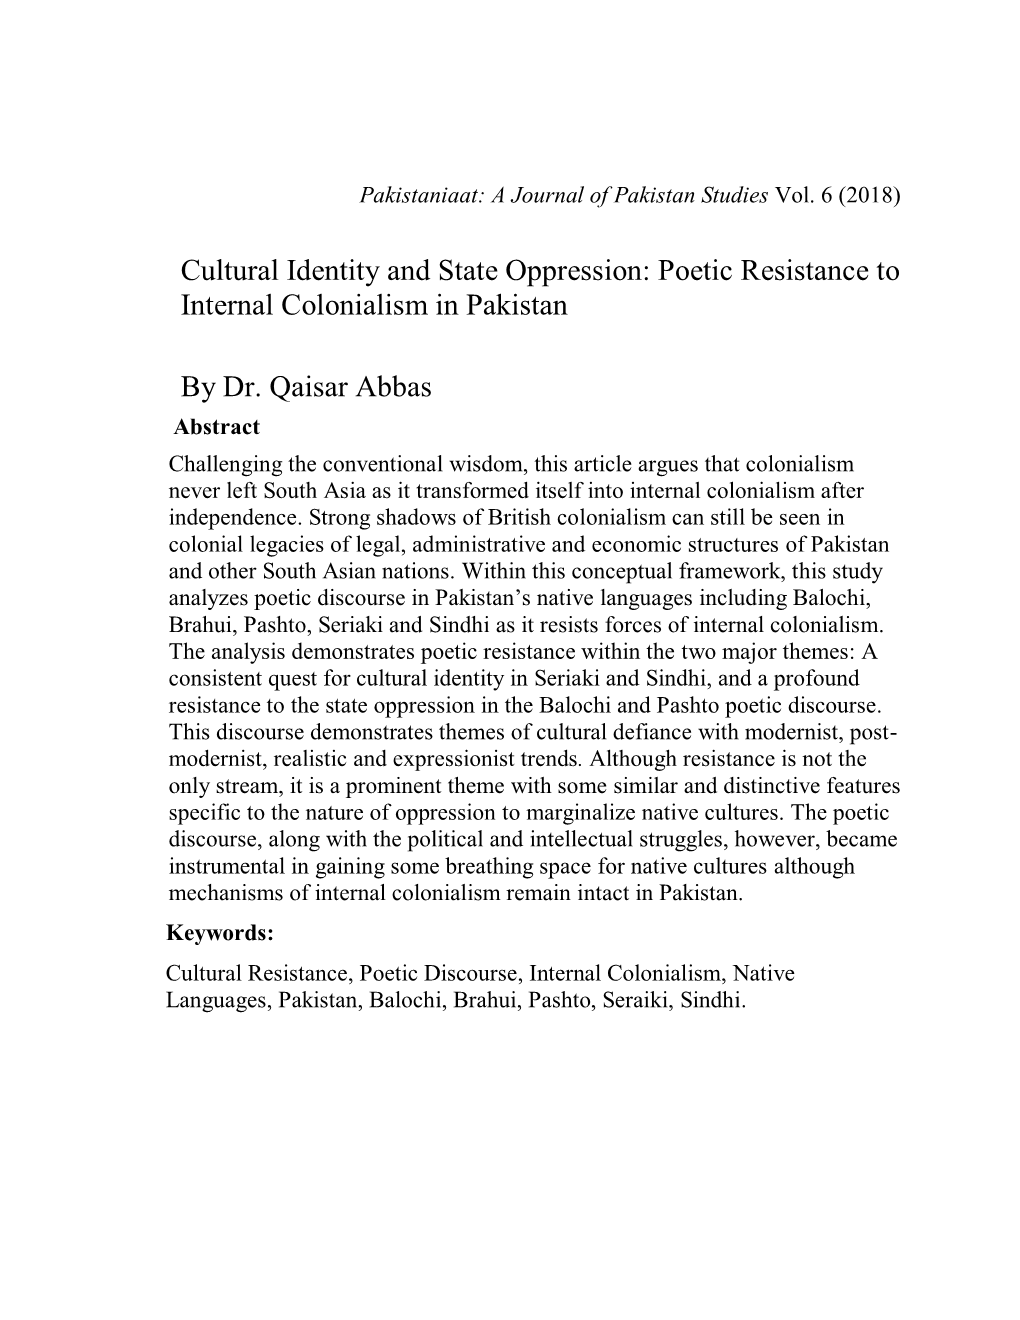 Poetic Resistance to Internal Colonialism in Pakistan by Dr